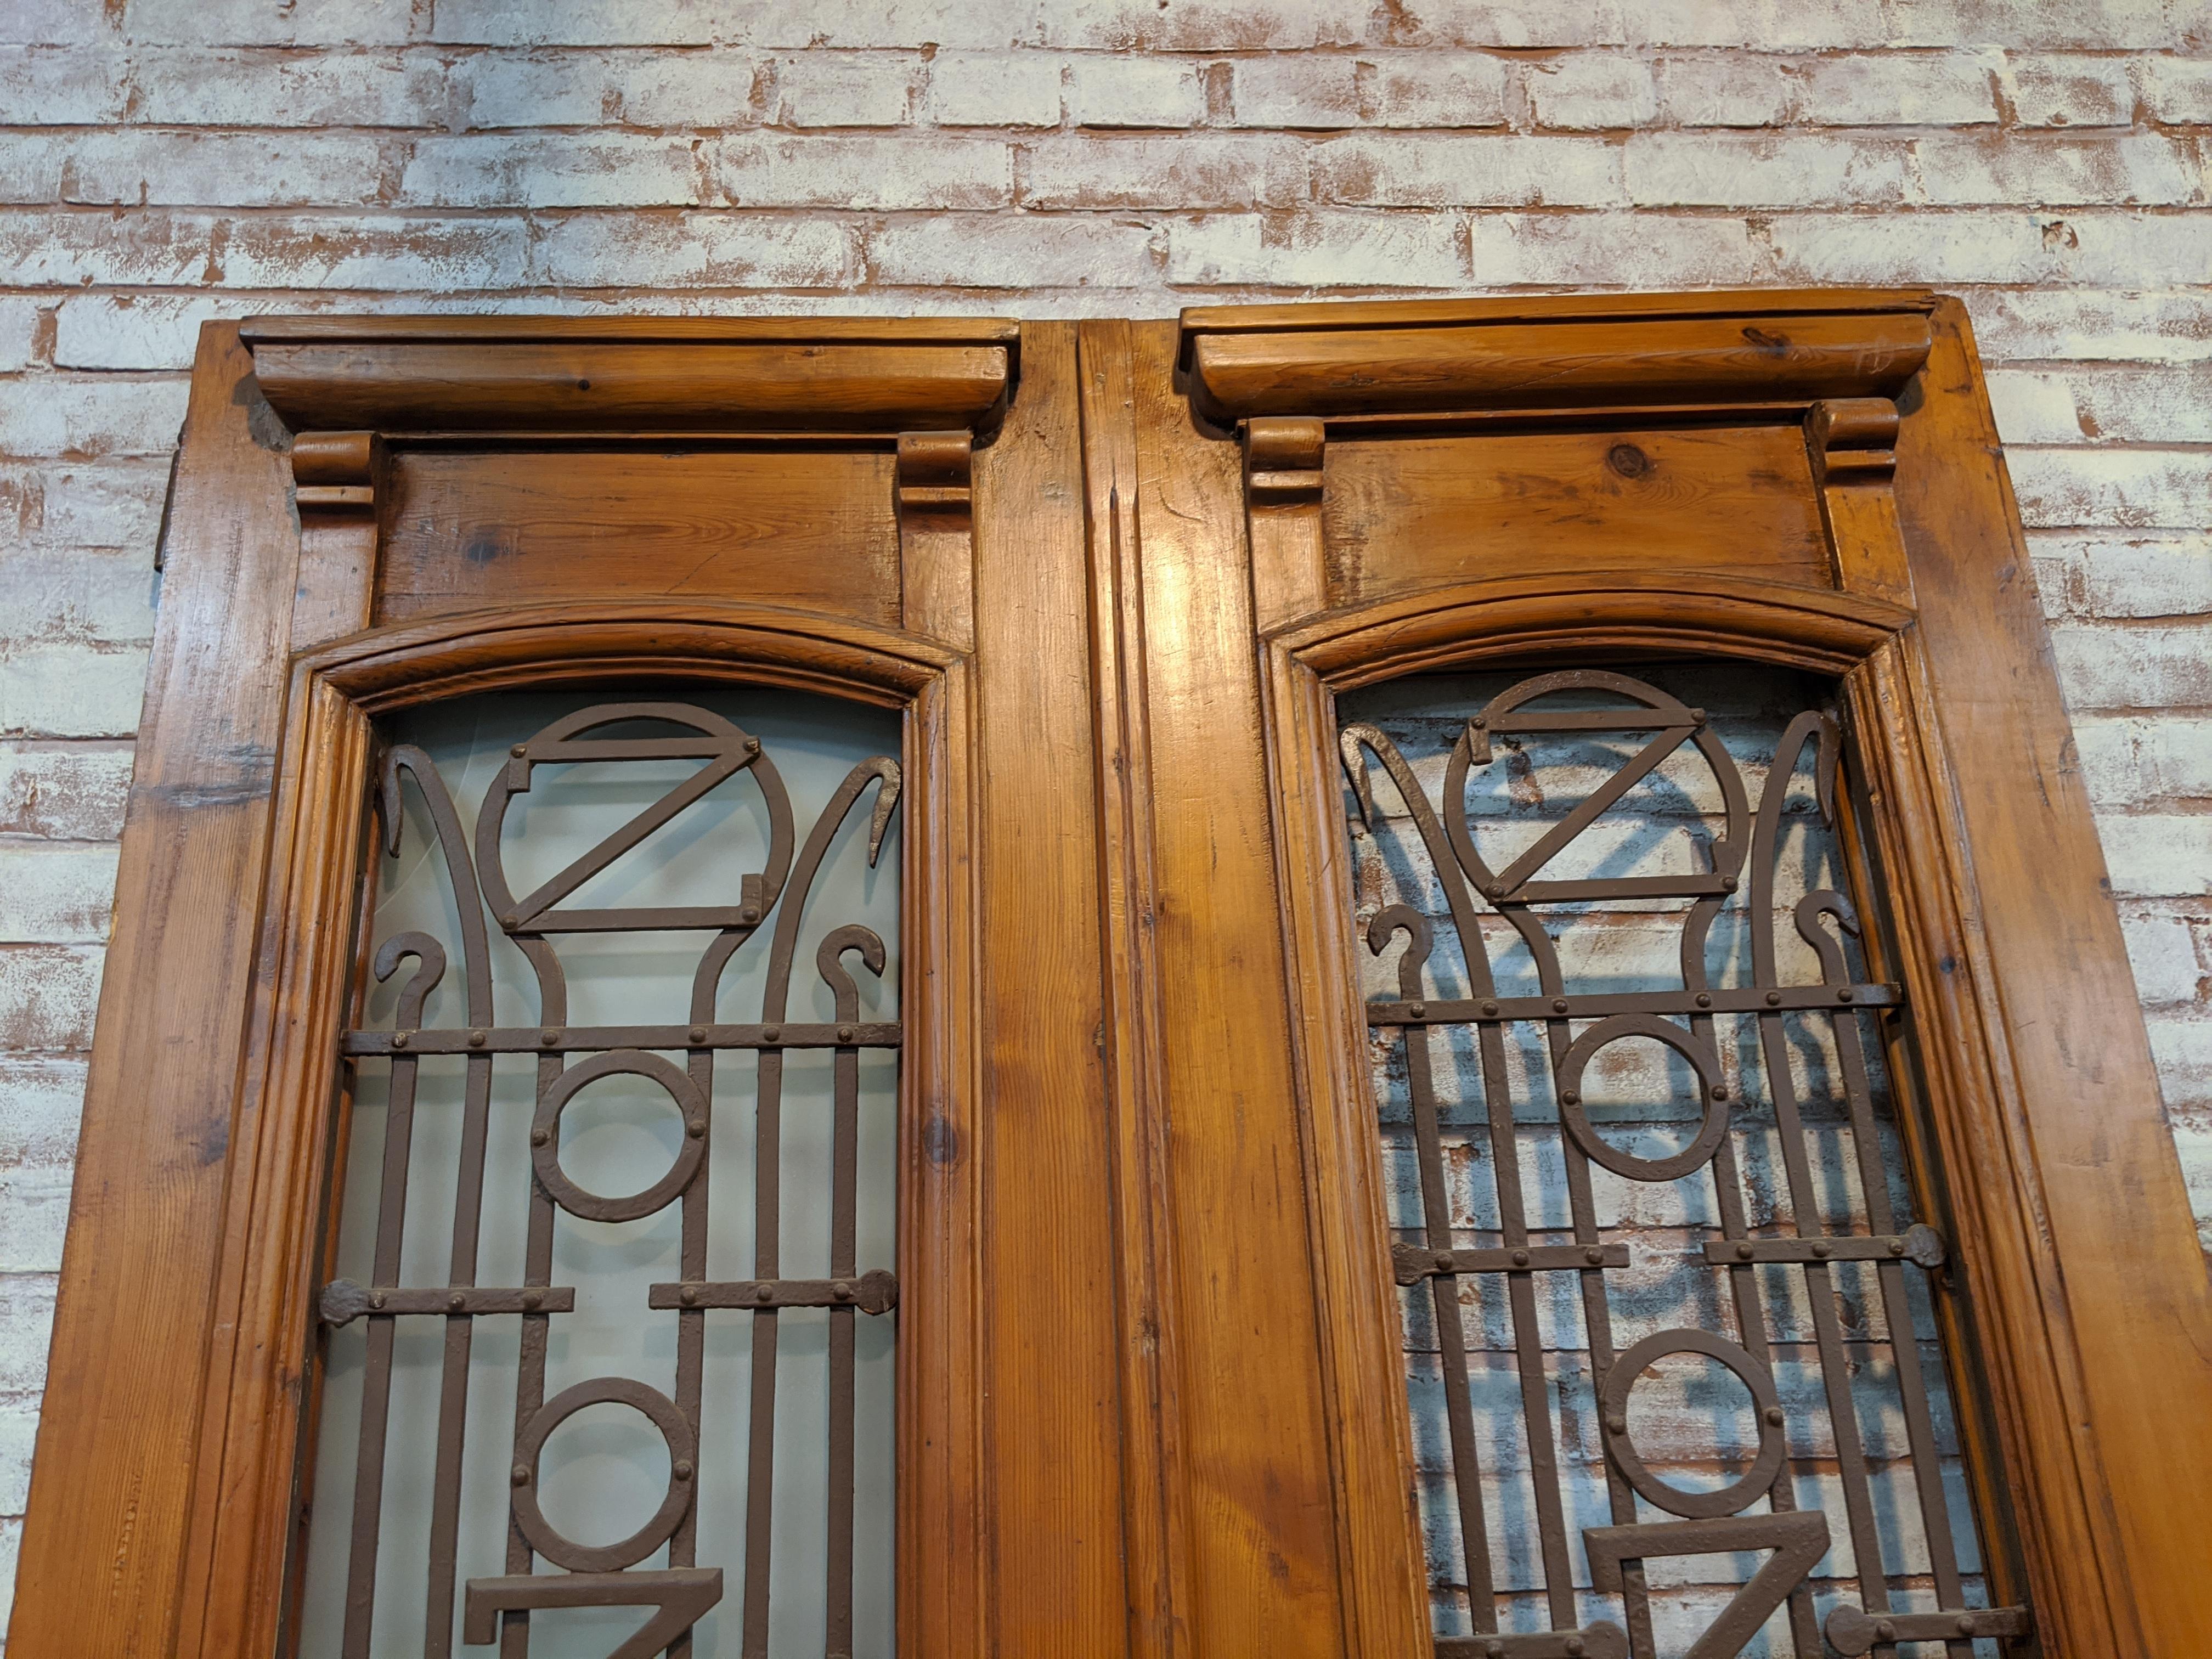 Pair of vintage doors from Egypt. All paint has been removed and doors have a waxed finish. Original ironwork also cleaned. Each door measures 23 1/2